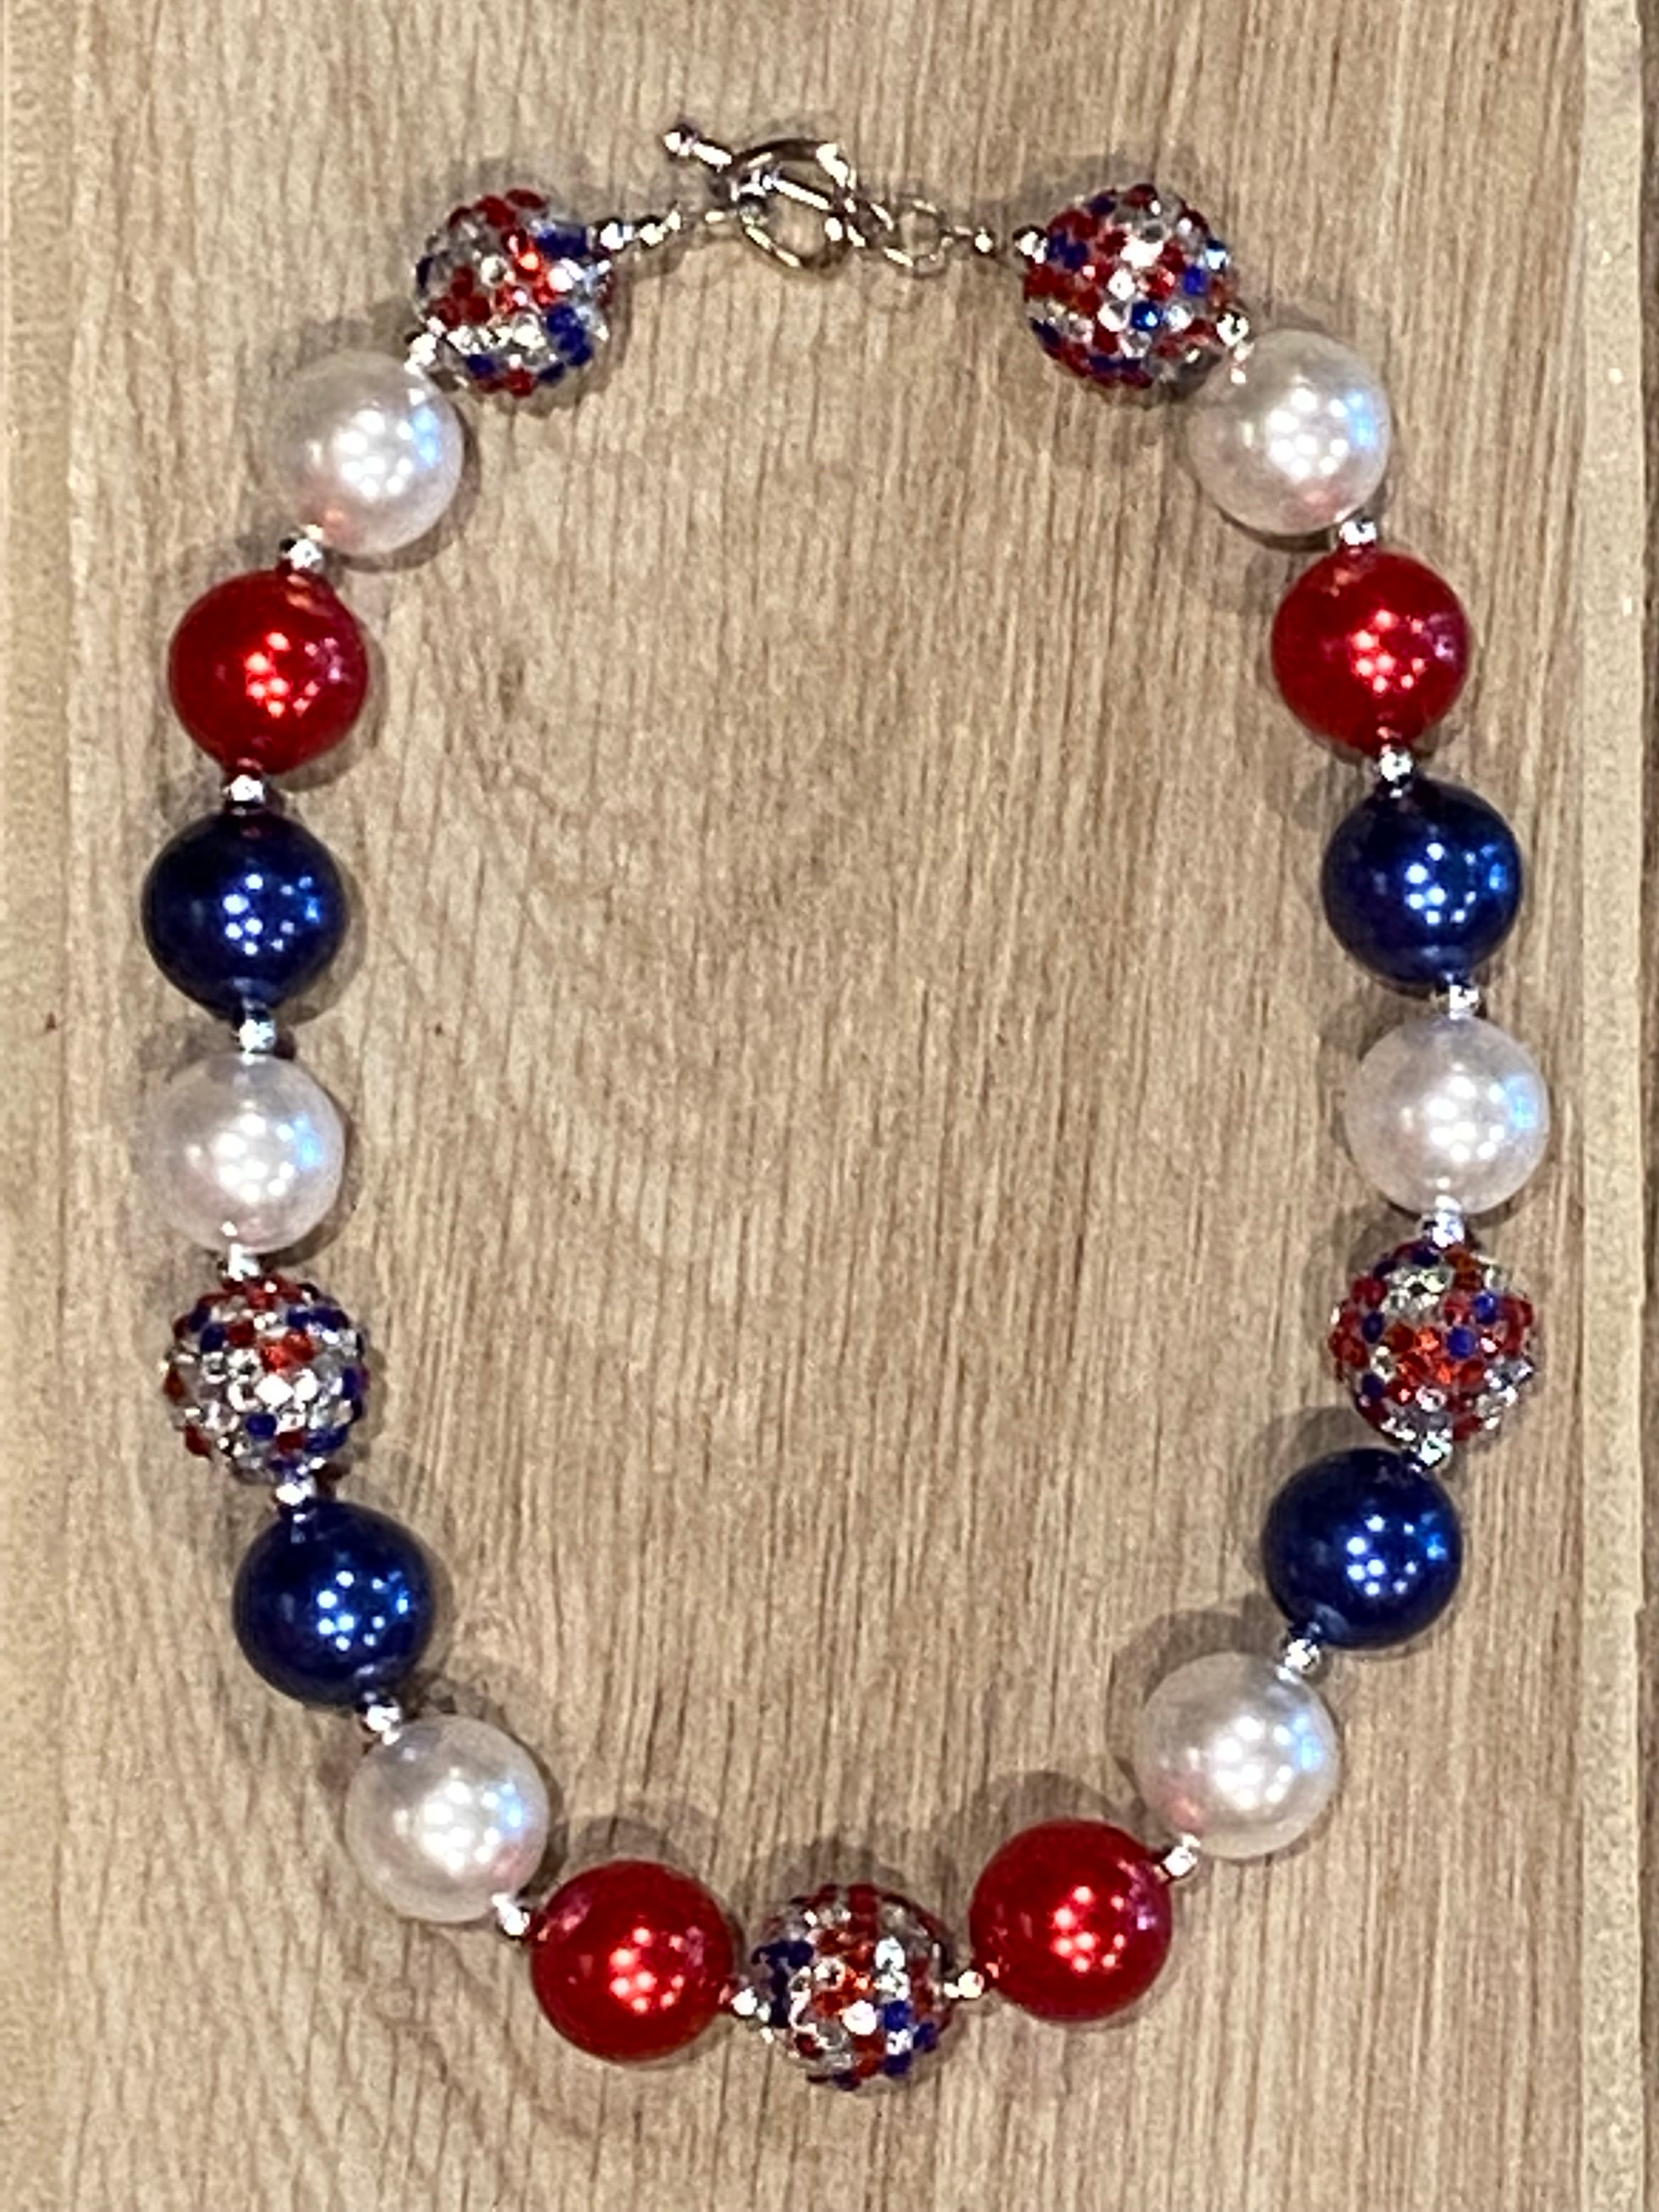 Patriotic Necklace 4th of July Necklace USA Flag Necklace Rhinestone Star  Necklace Sparkly Star Necklace Patriotic Jewelry USA Jewelry - Etsy